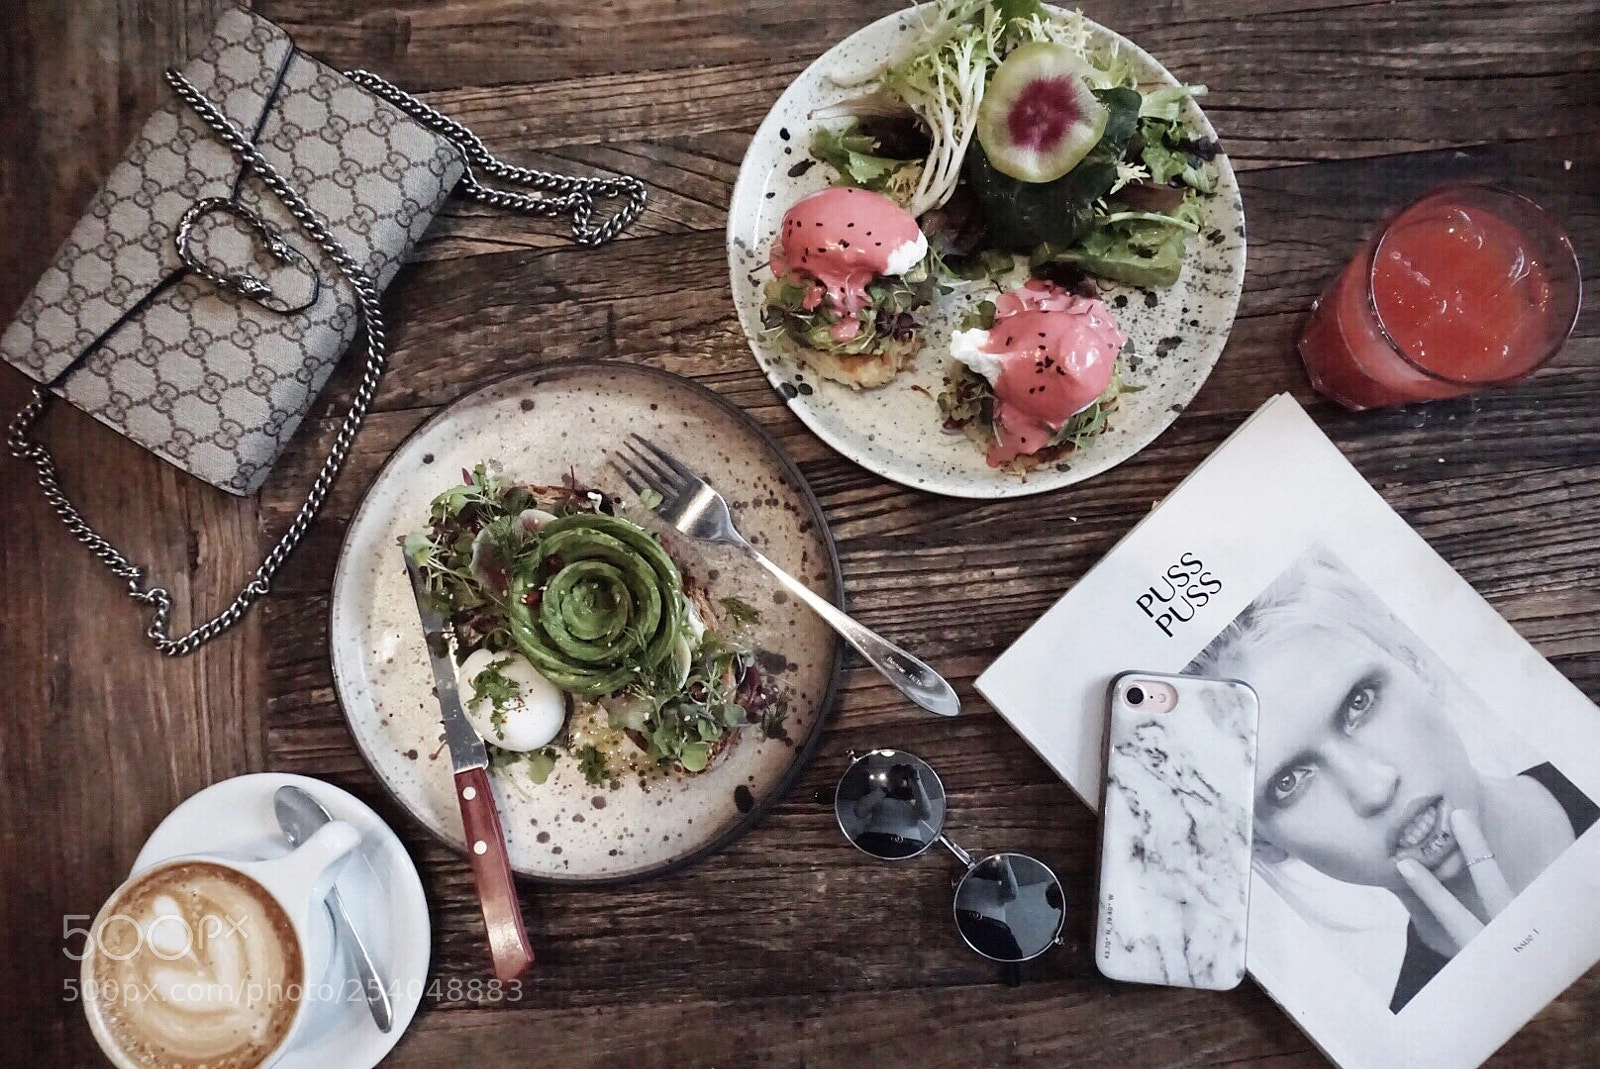 Sony a6000 sample photo. Prettiest brunch❤︎ photography